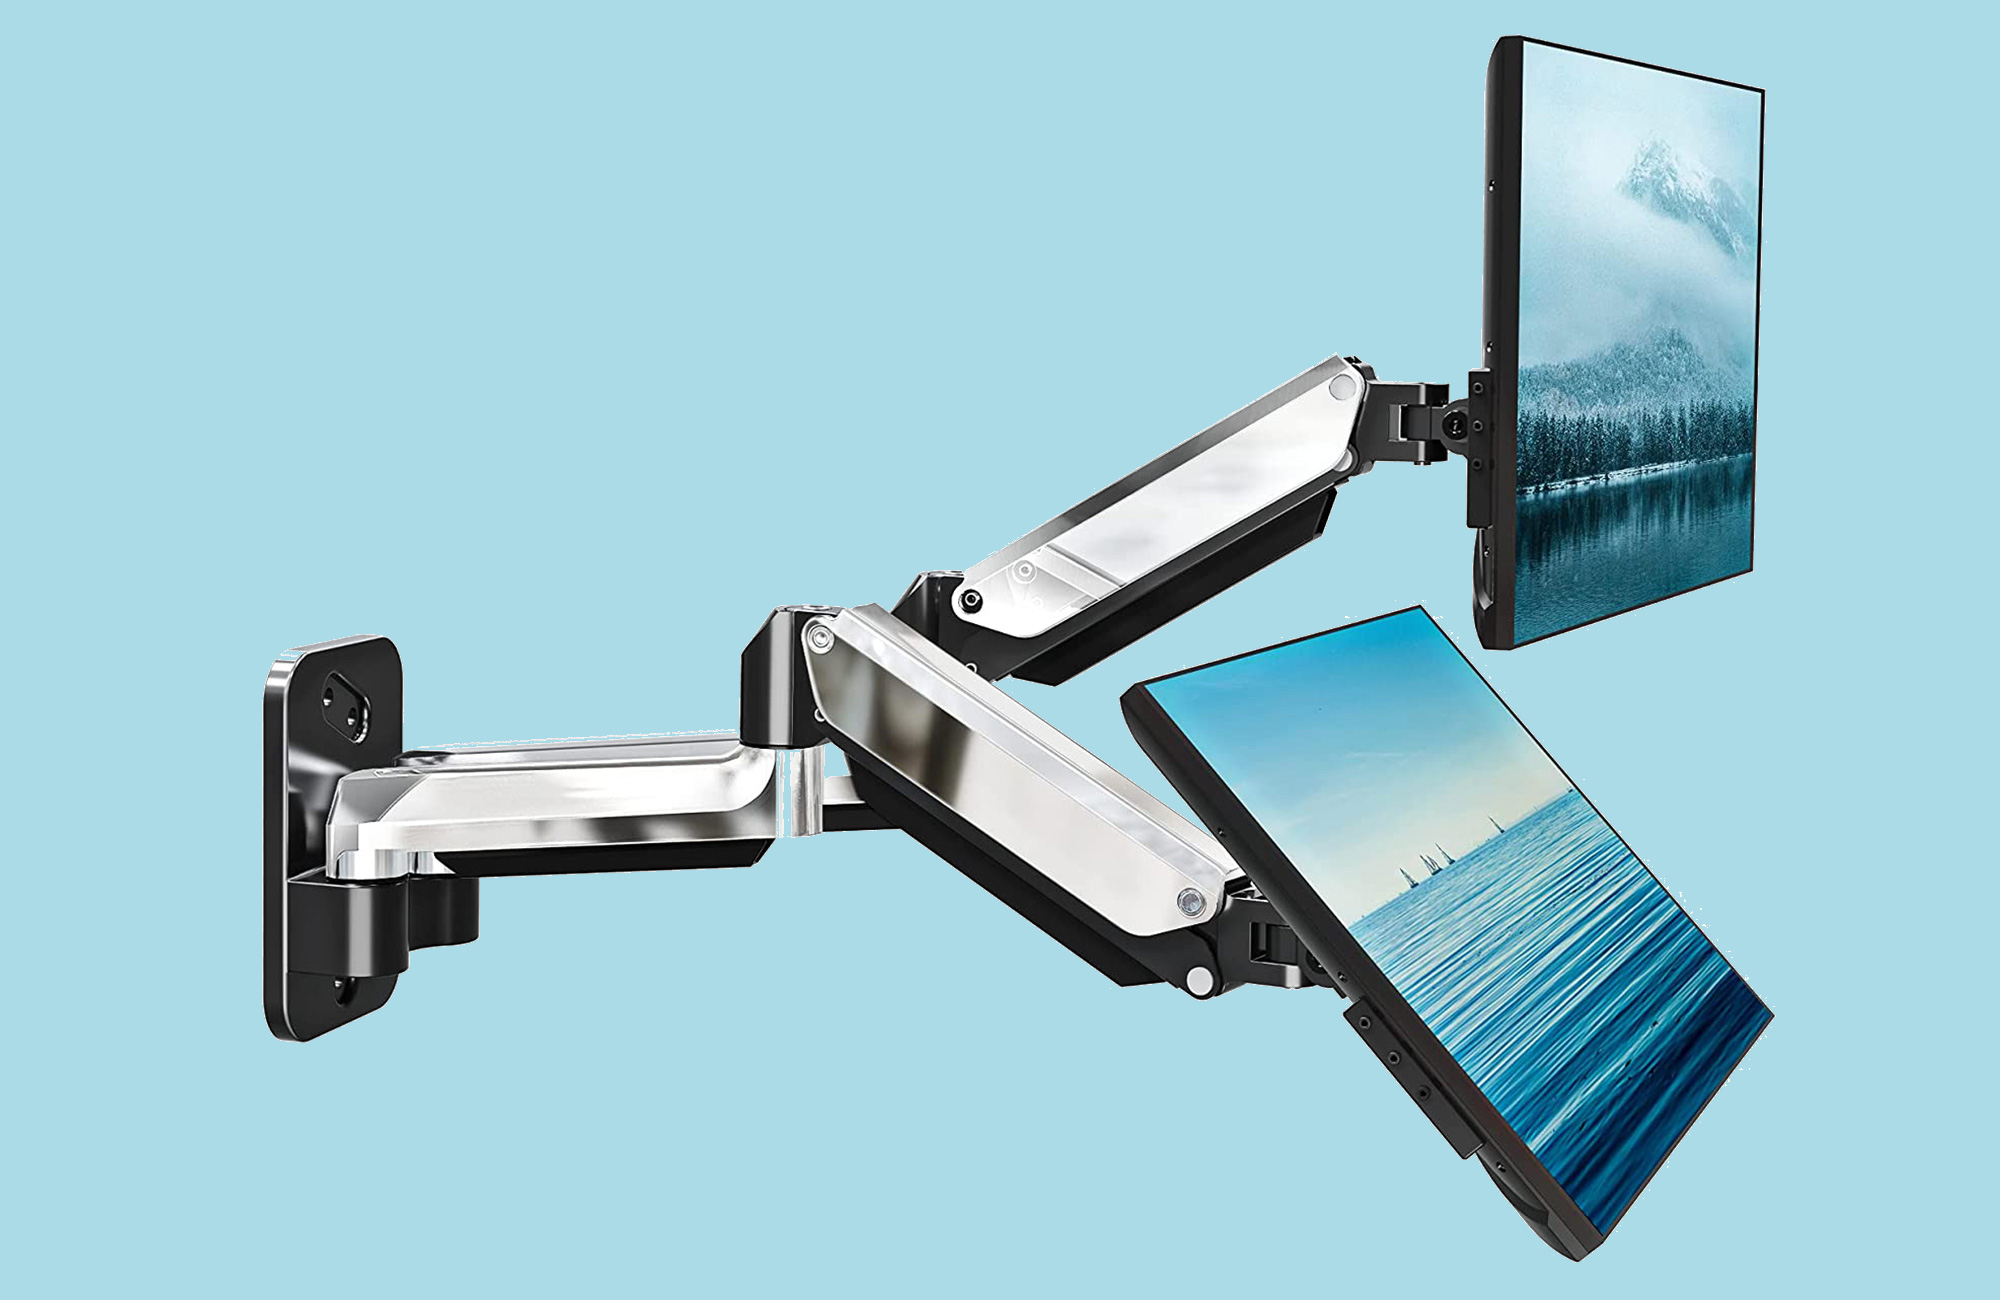 The best dual monitor stands offer lots of desk space